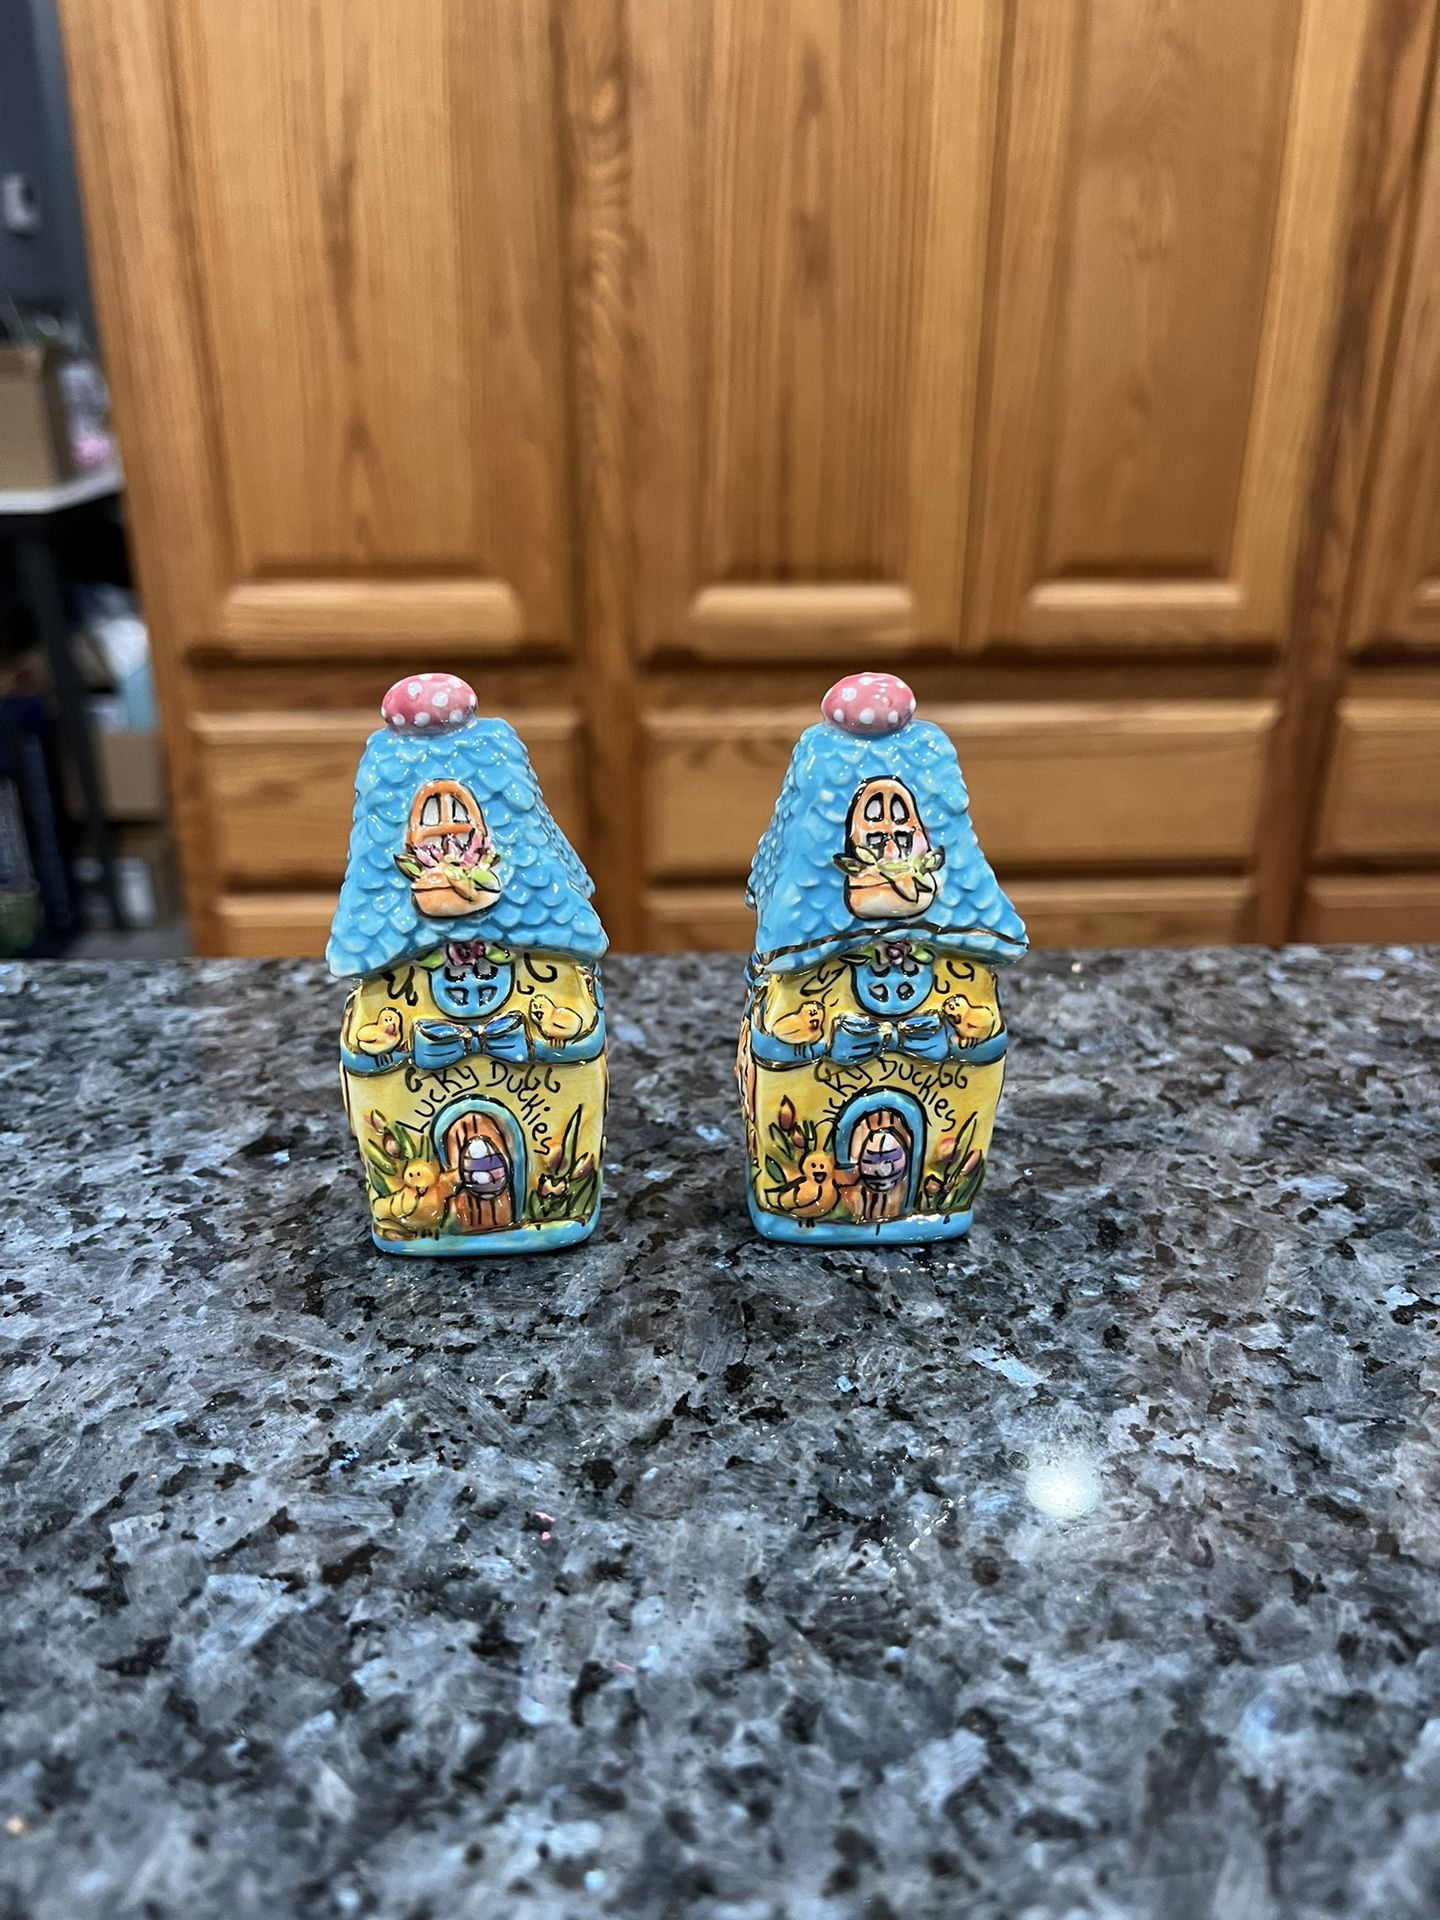 Lucky Duckies Ceramic Pair Of Salt And Pepper Shakers.  Preowned 